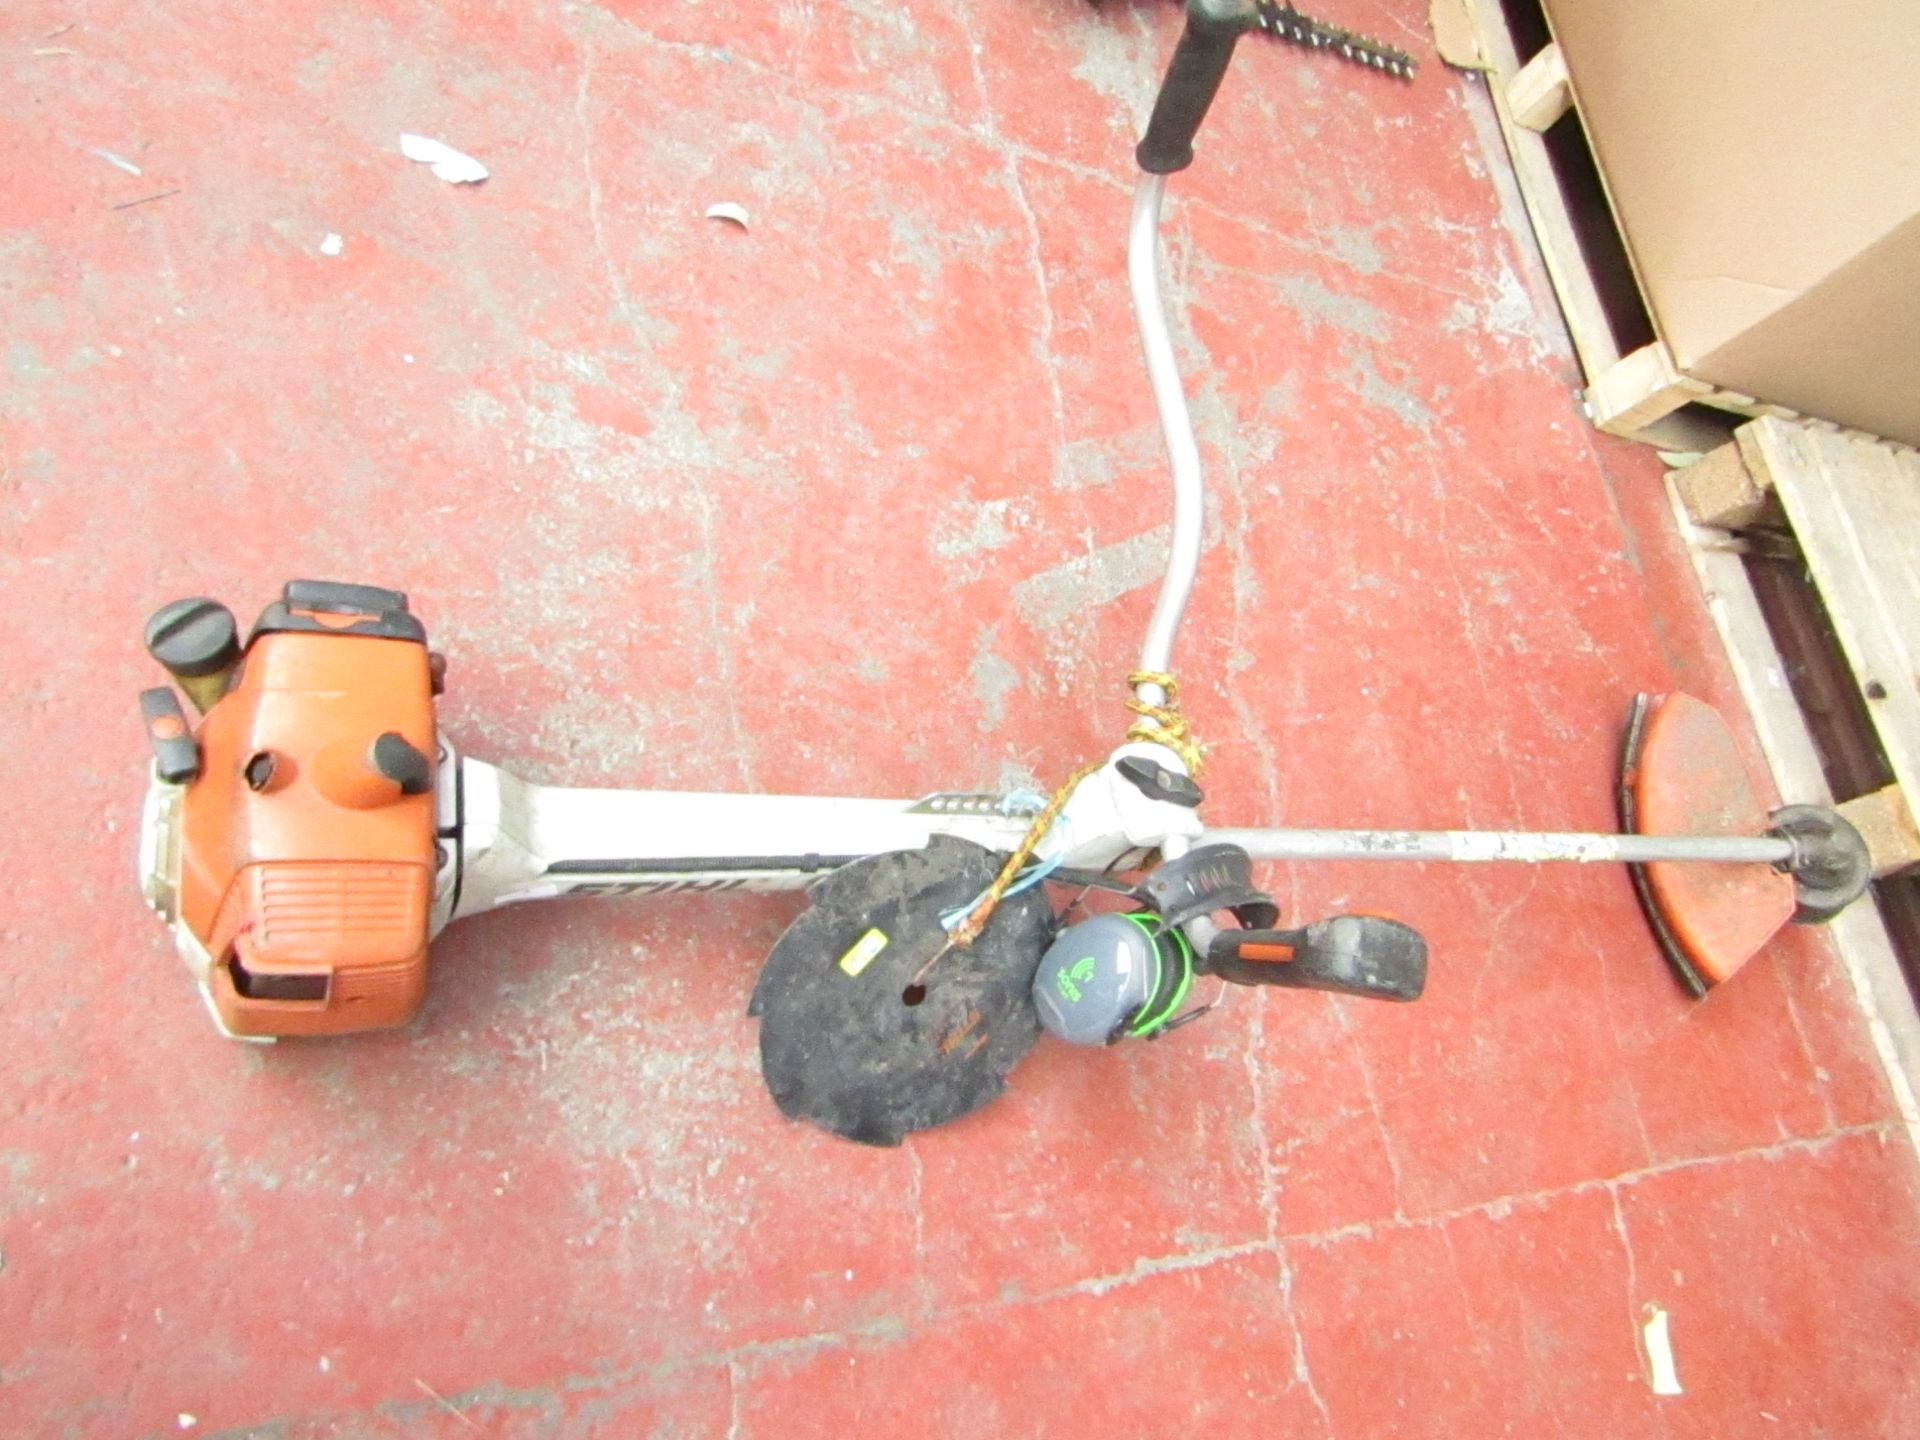 Stihl FS350 petrol Brush Cutter with Blade, unchecked